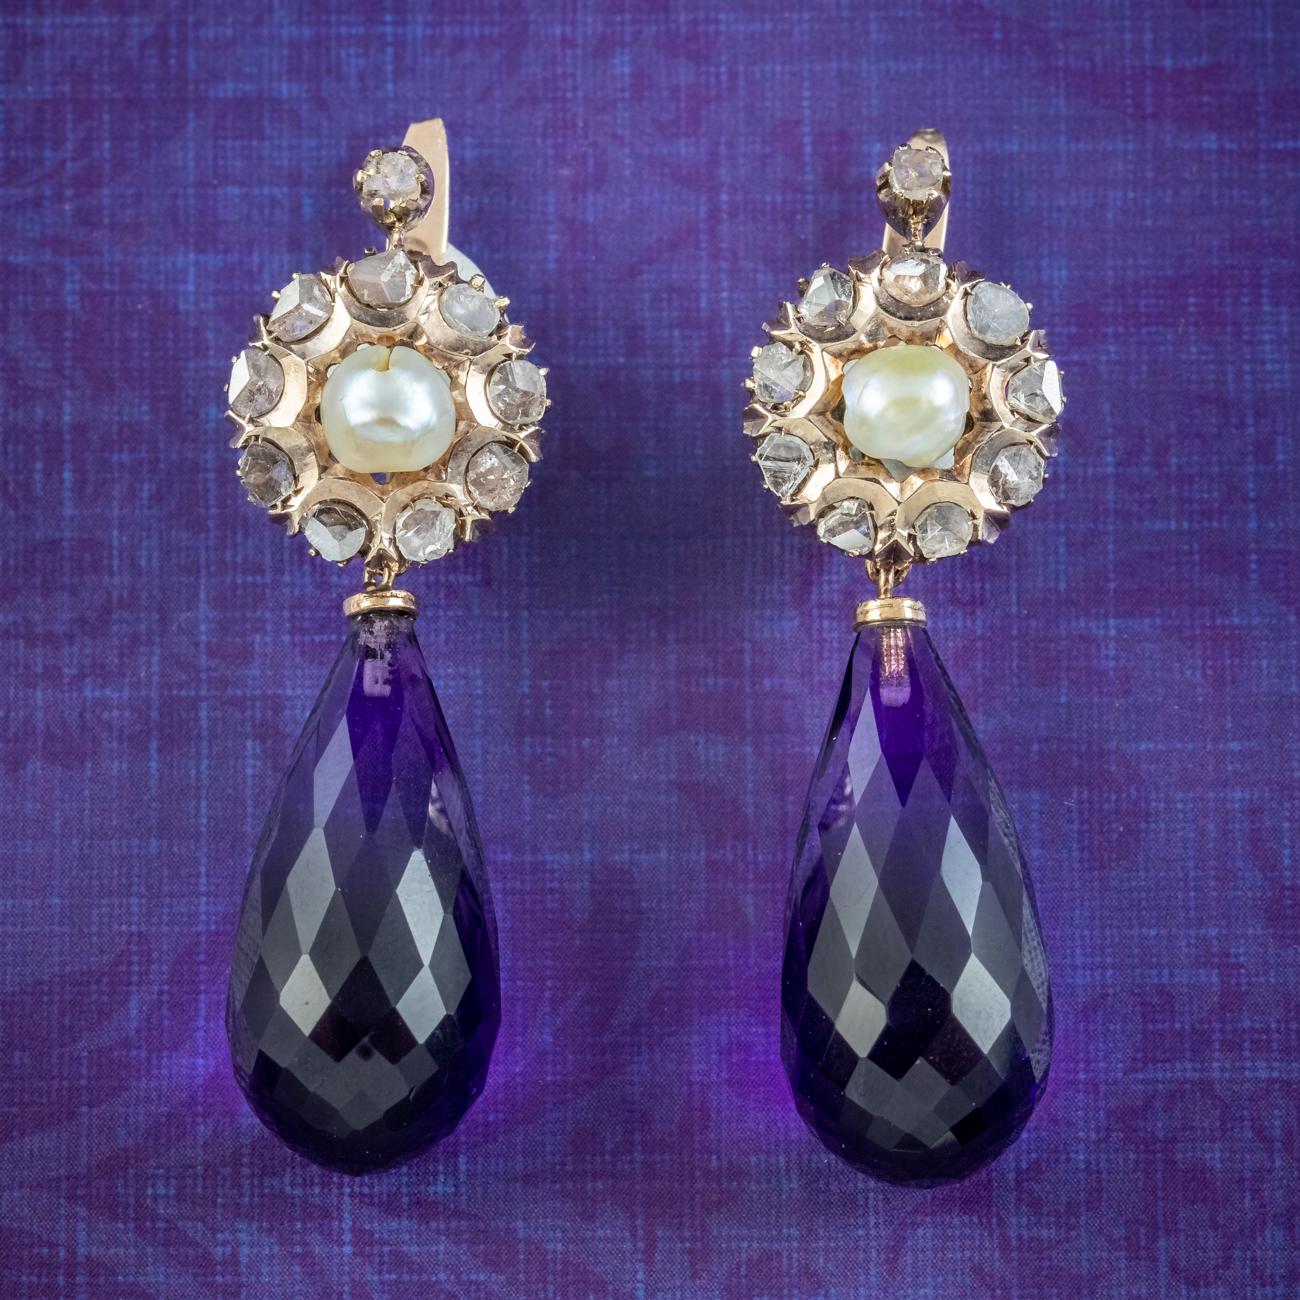 A glamorous pair of vintage drop earrings (Circa 1930) adorned with luxurious briolette cut amethyst droppers with a deep, regal purple hue (approx. 20ct each). The tops are fashioned in 14ct gold with a central pearl and a halo of flickering rose